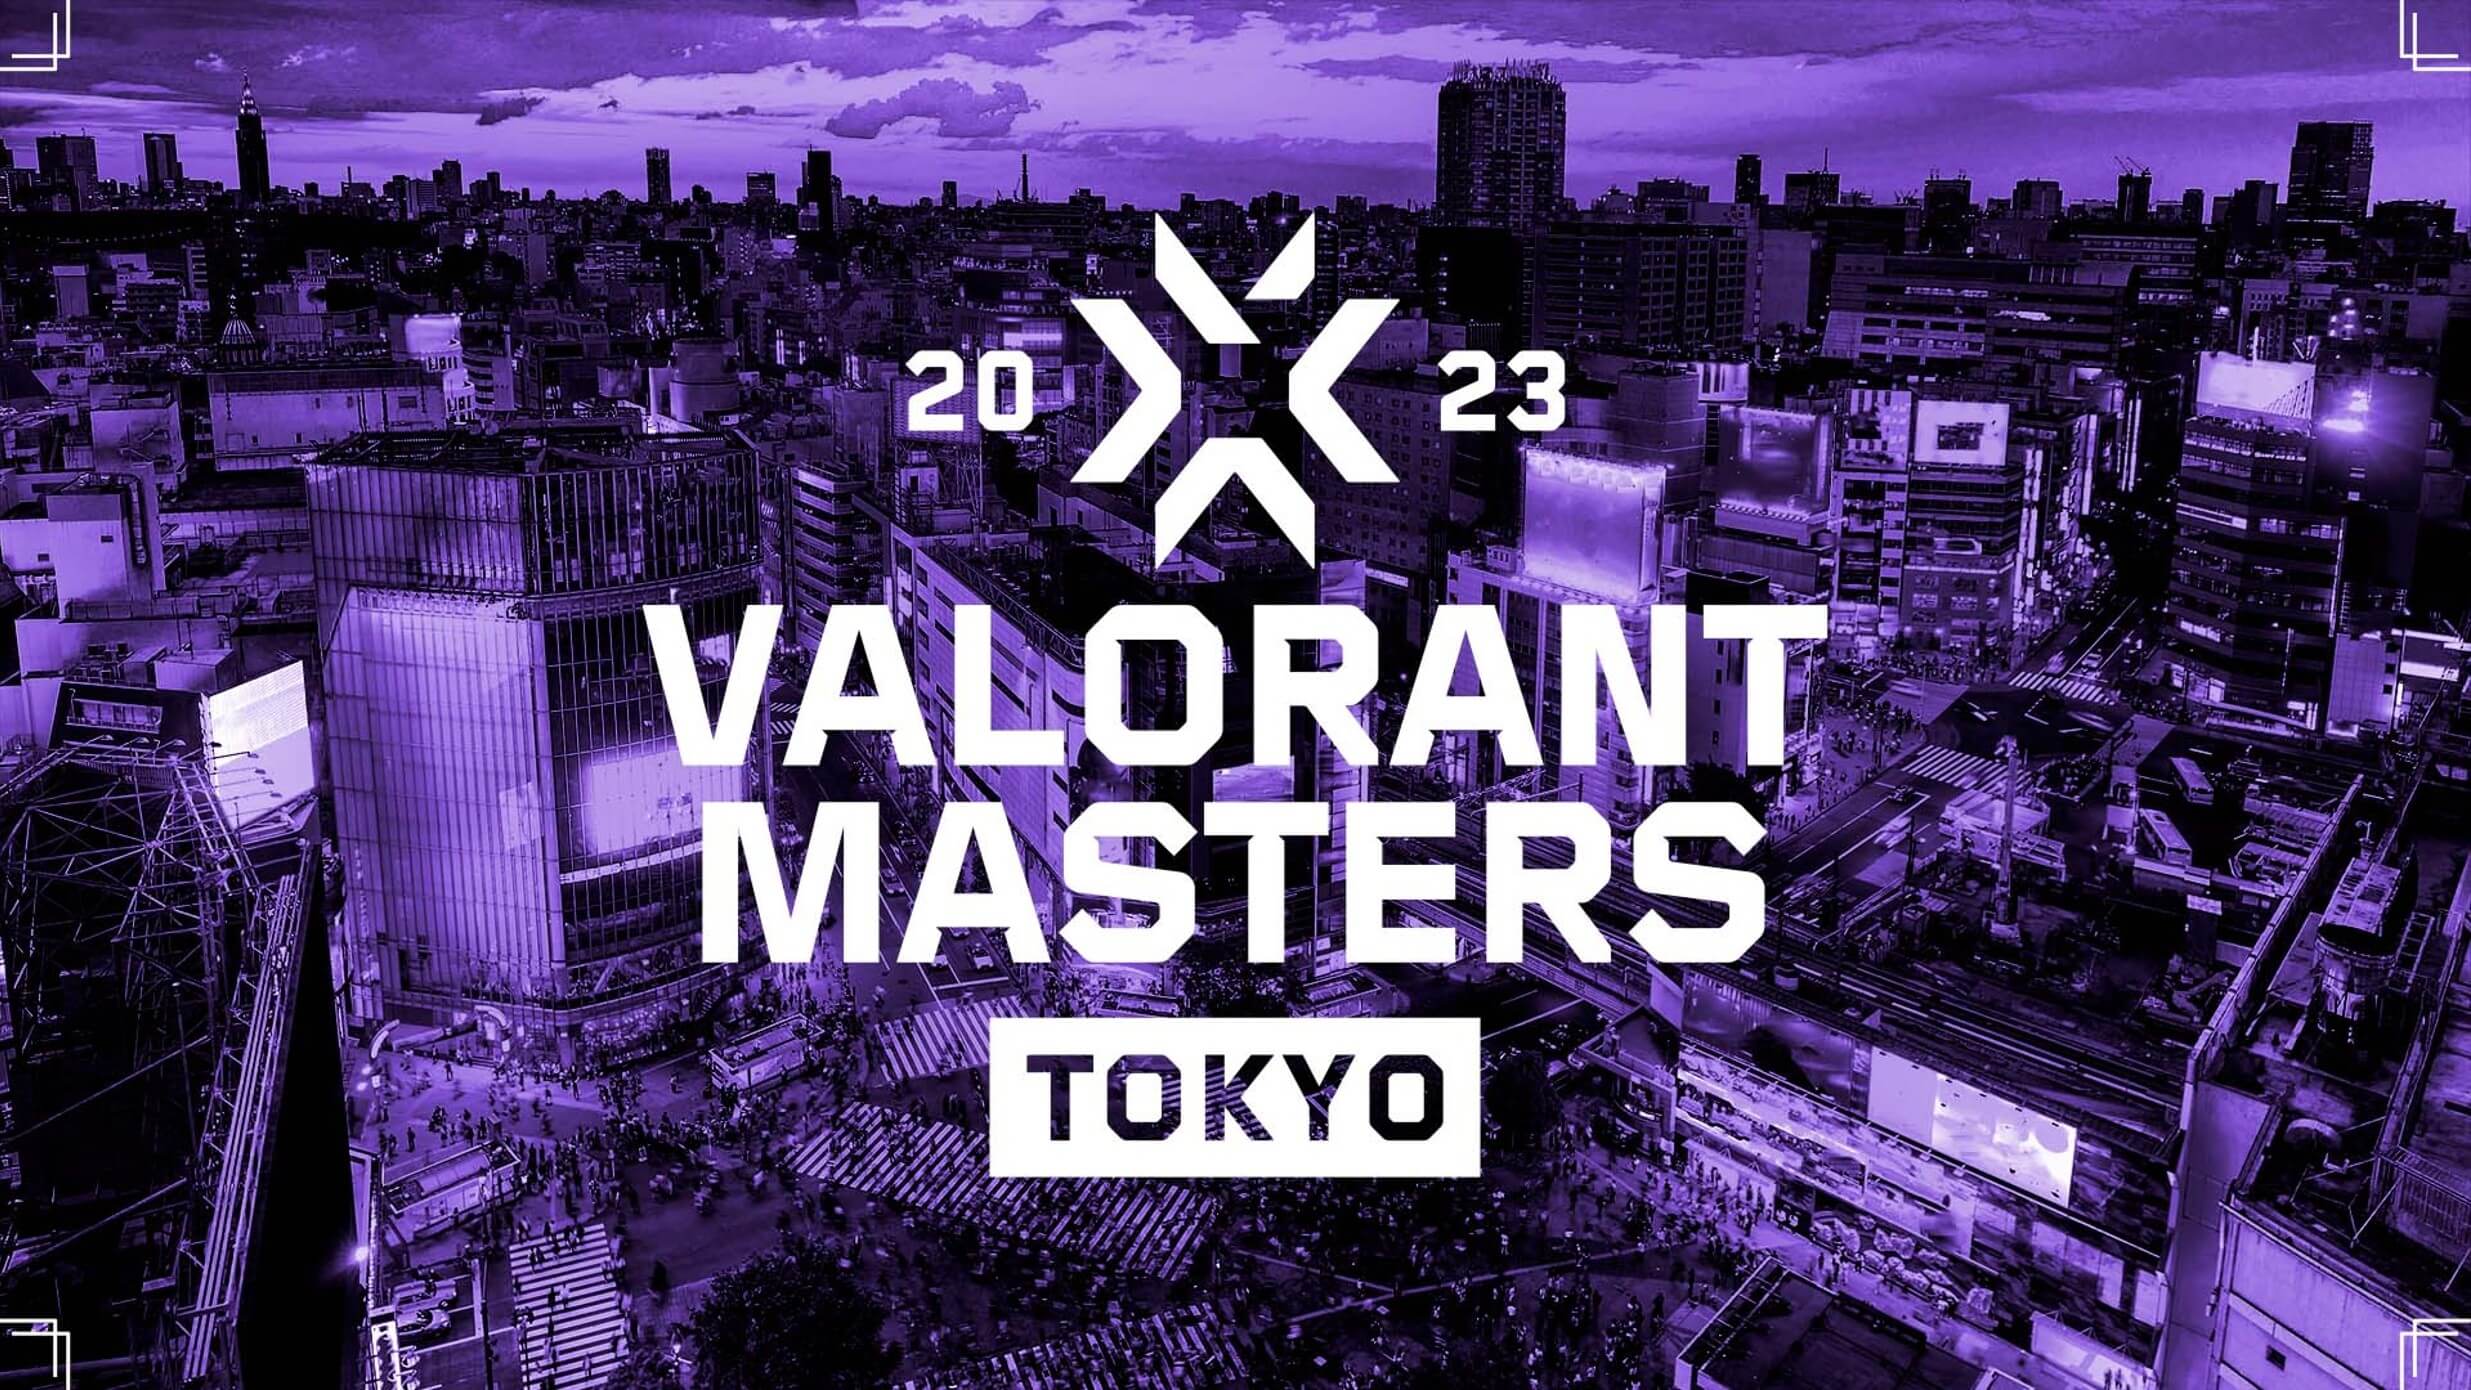 Deaths with Shorty at VCT Masters Tokyo could set a record